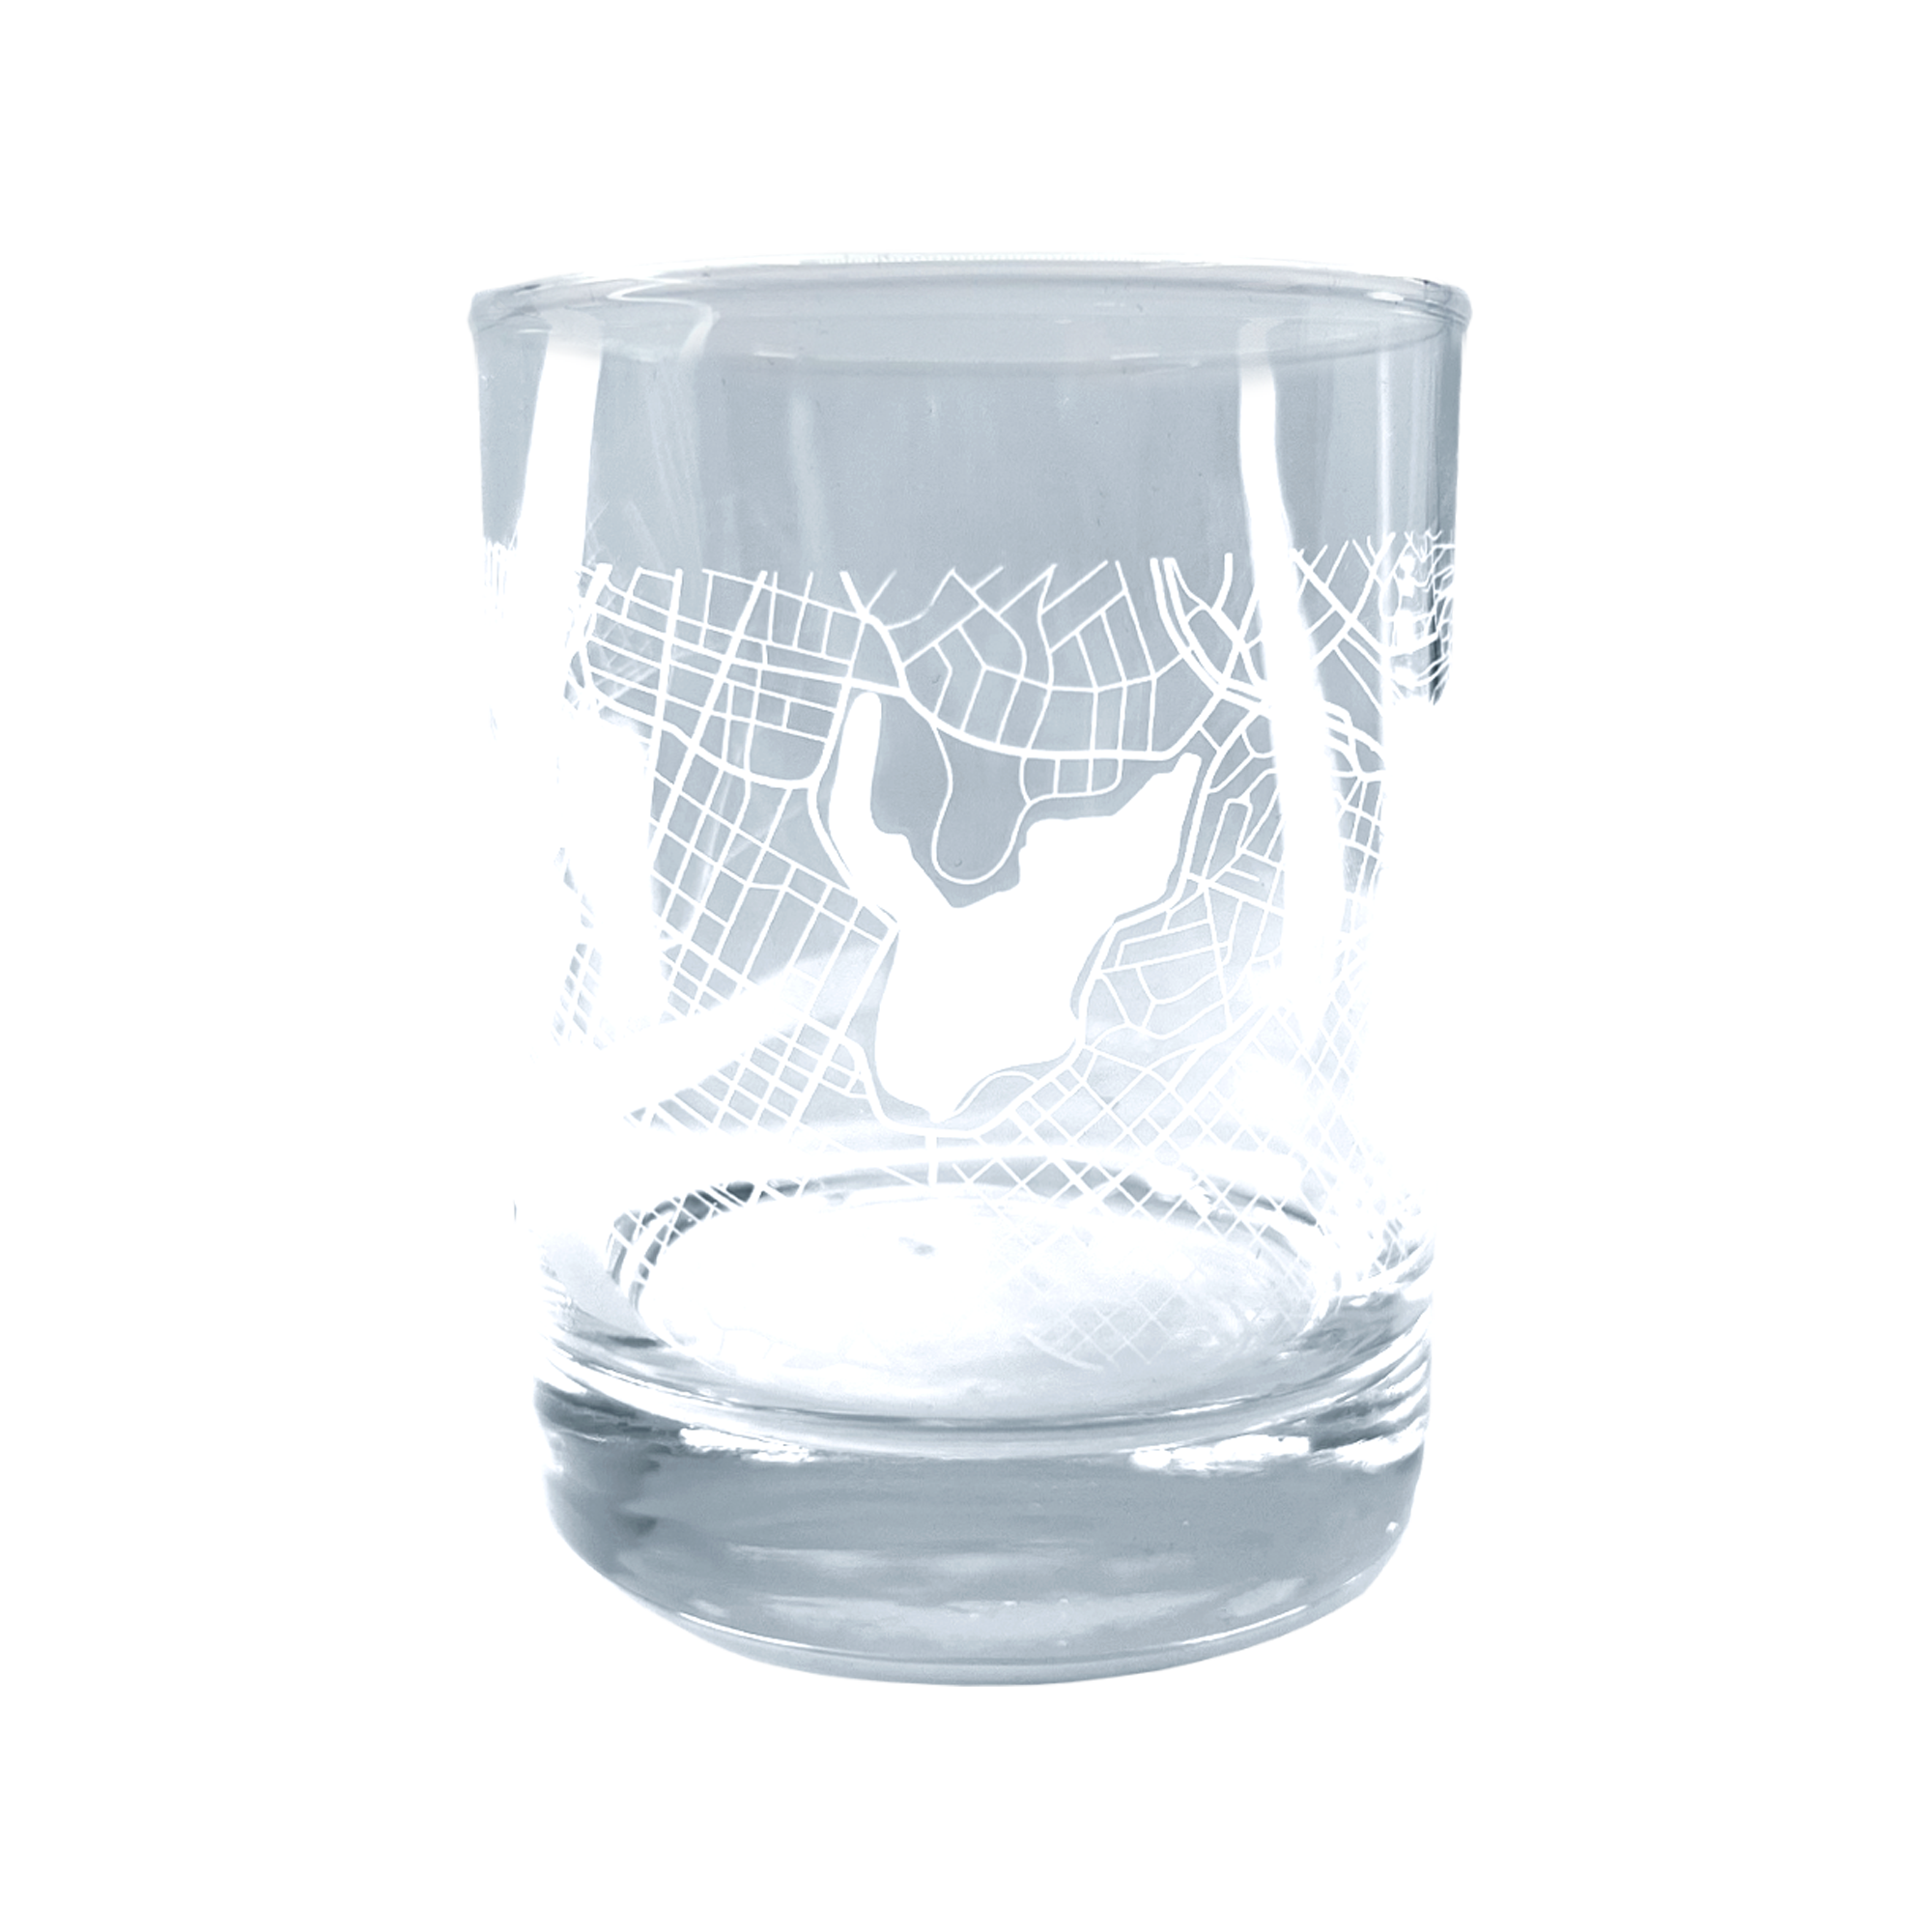 Clear glass whisky tumbler with an etched aerial map of Oakland.